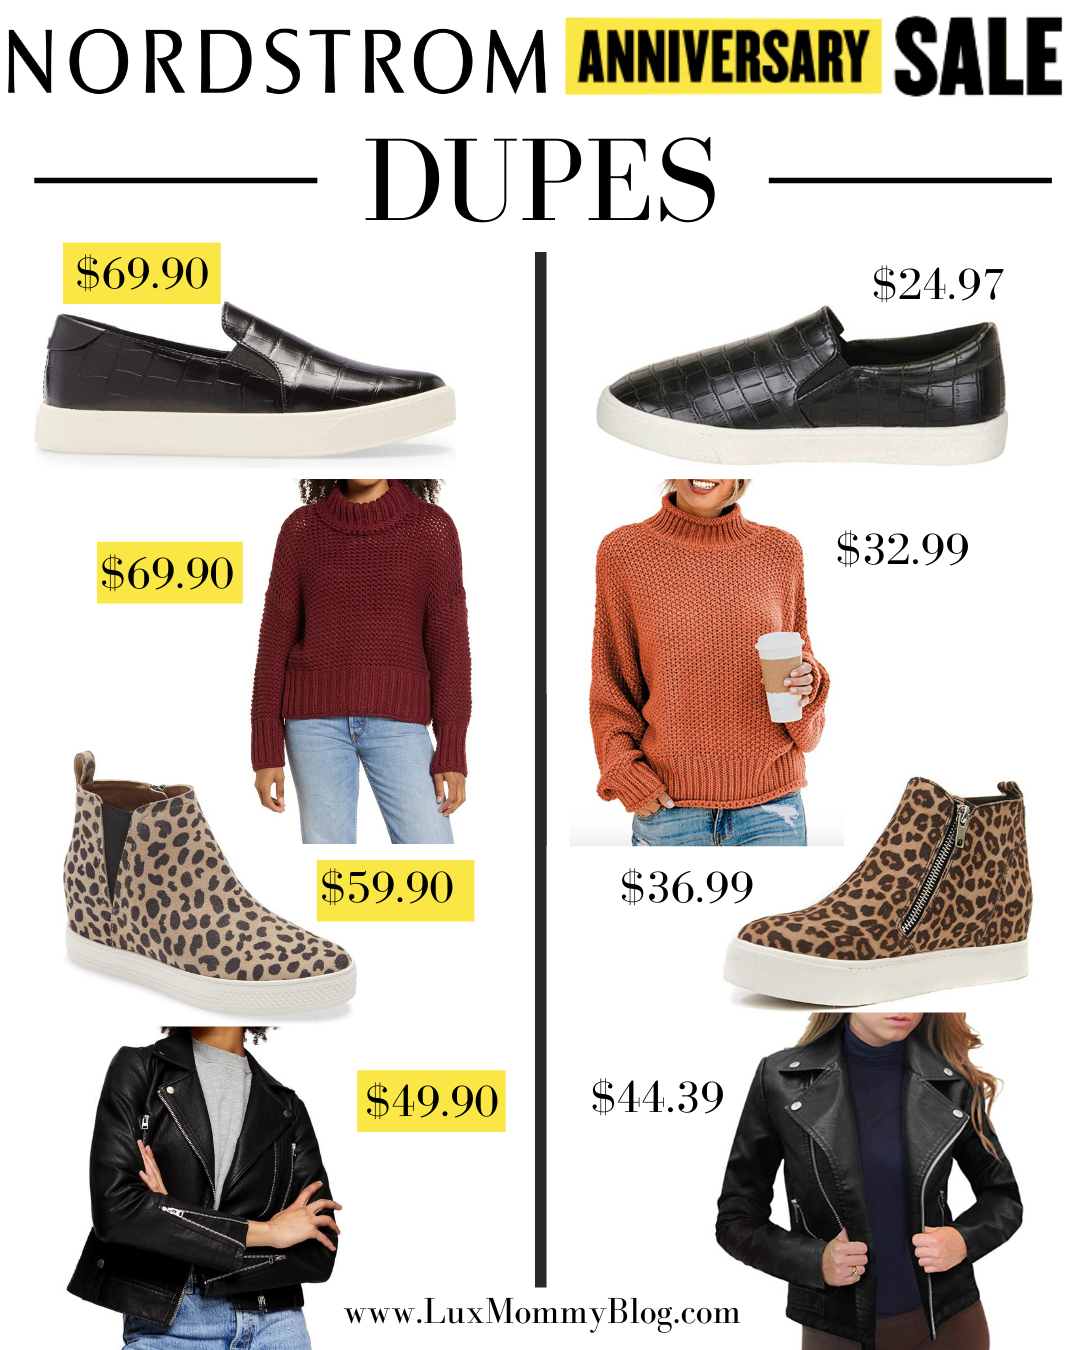 Houston top fashion blogger LuxMommy shares Nordstrom Anniversary Sale dupes